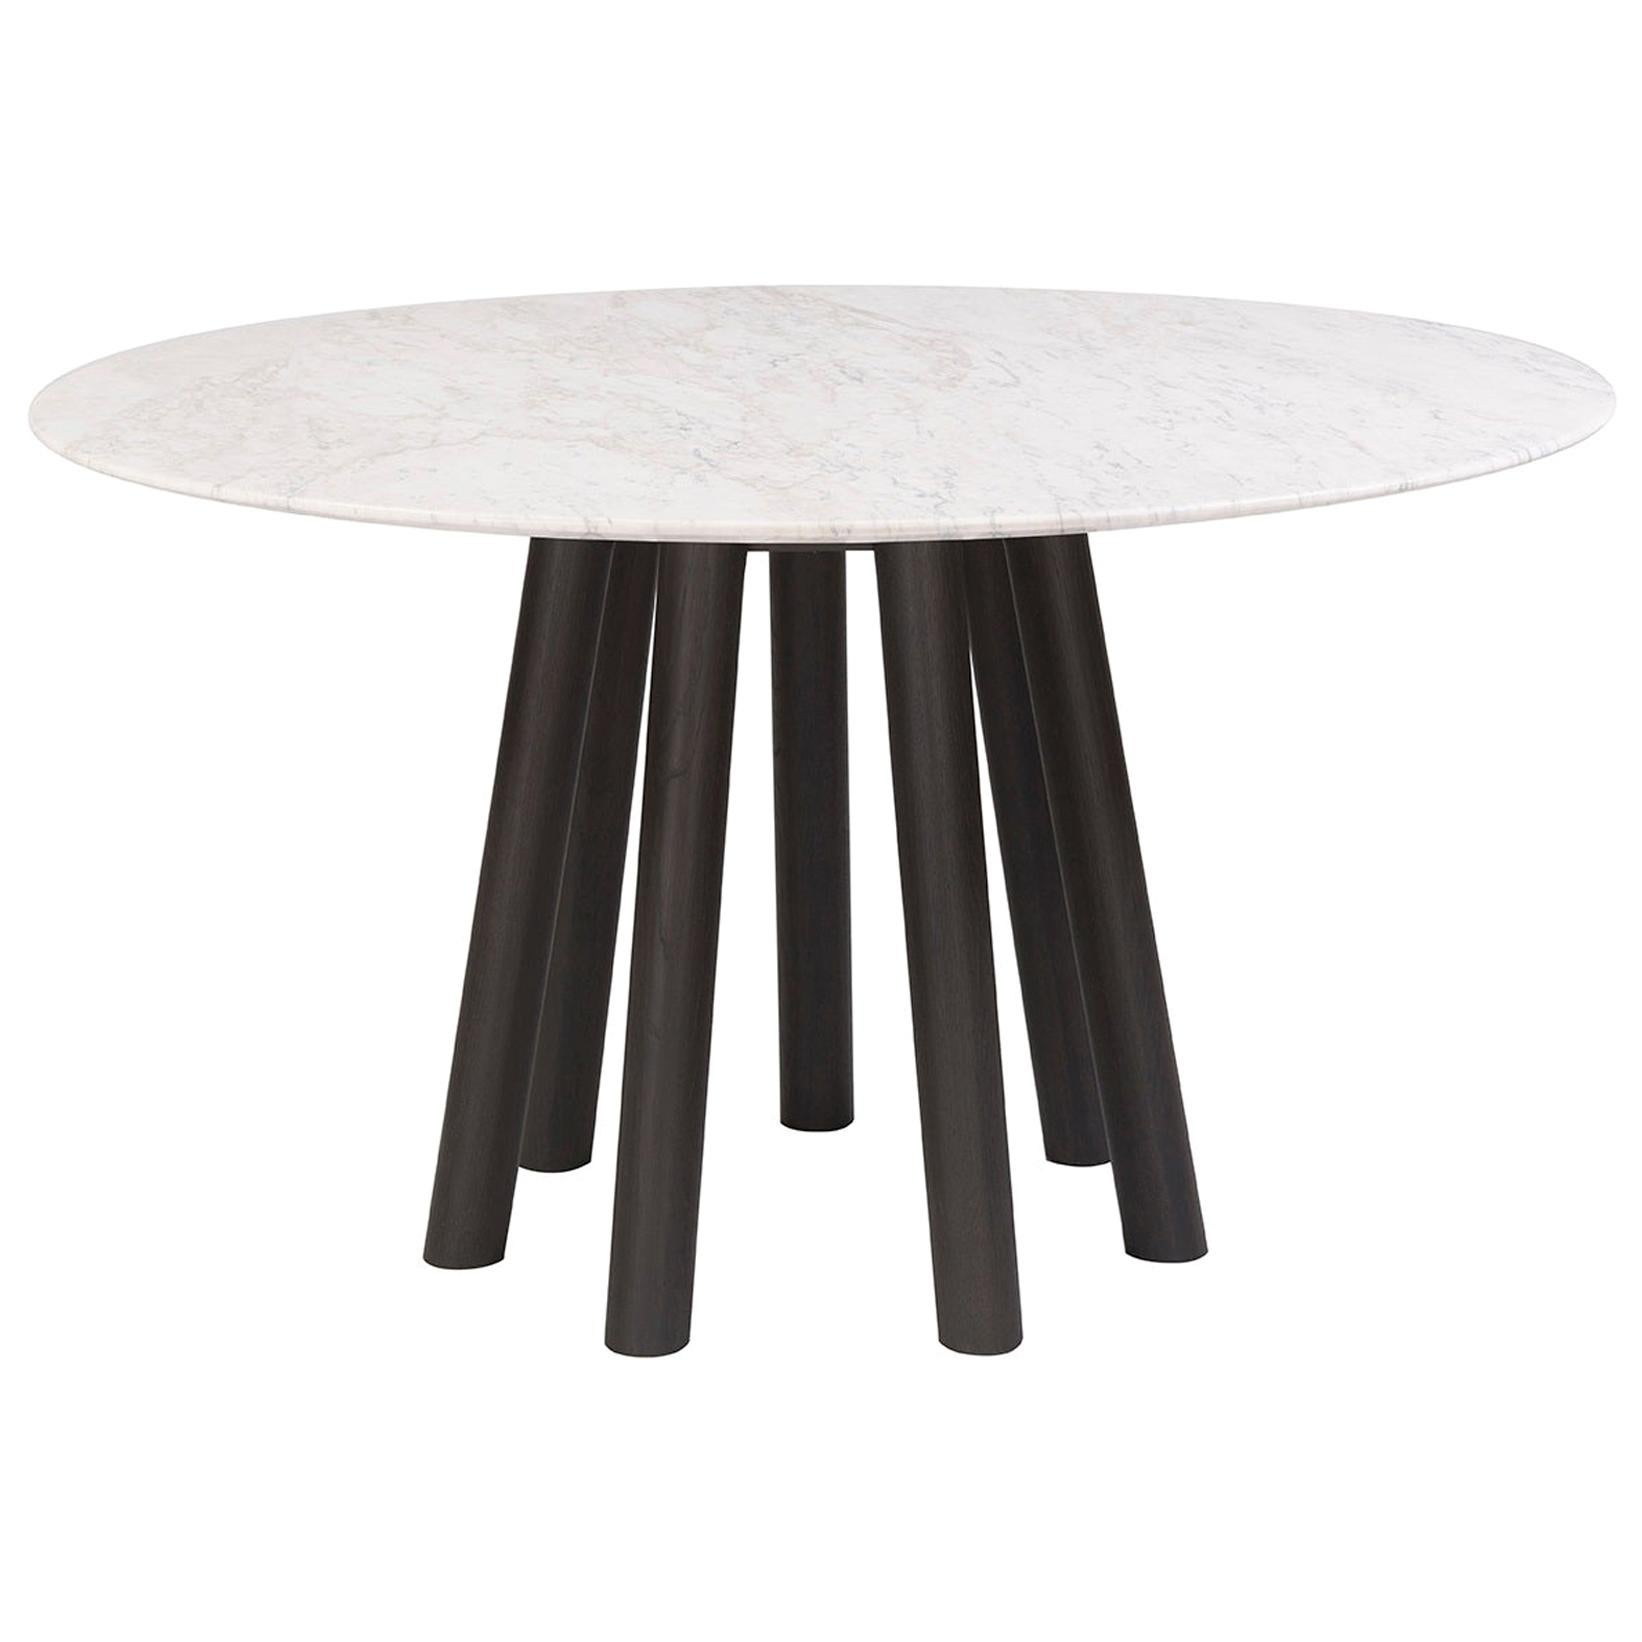 Contemporary Round Dining Table, Walnut/Marble.